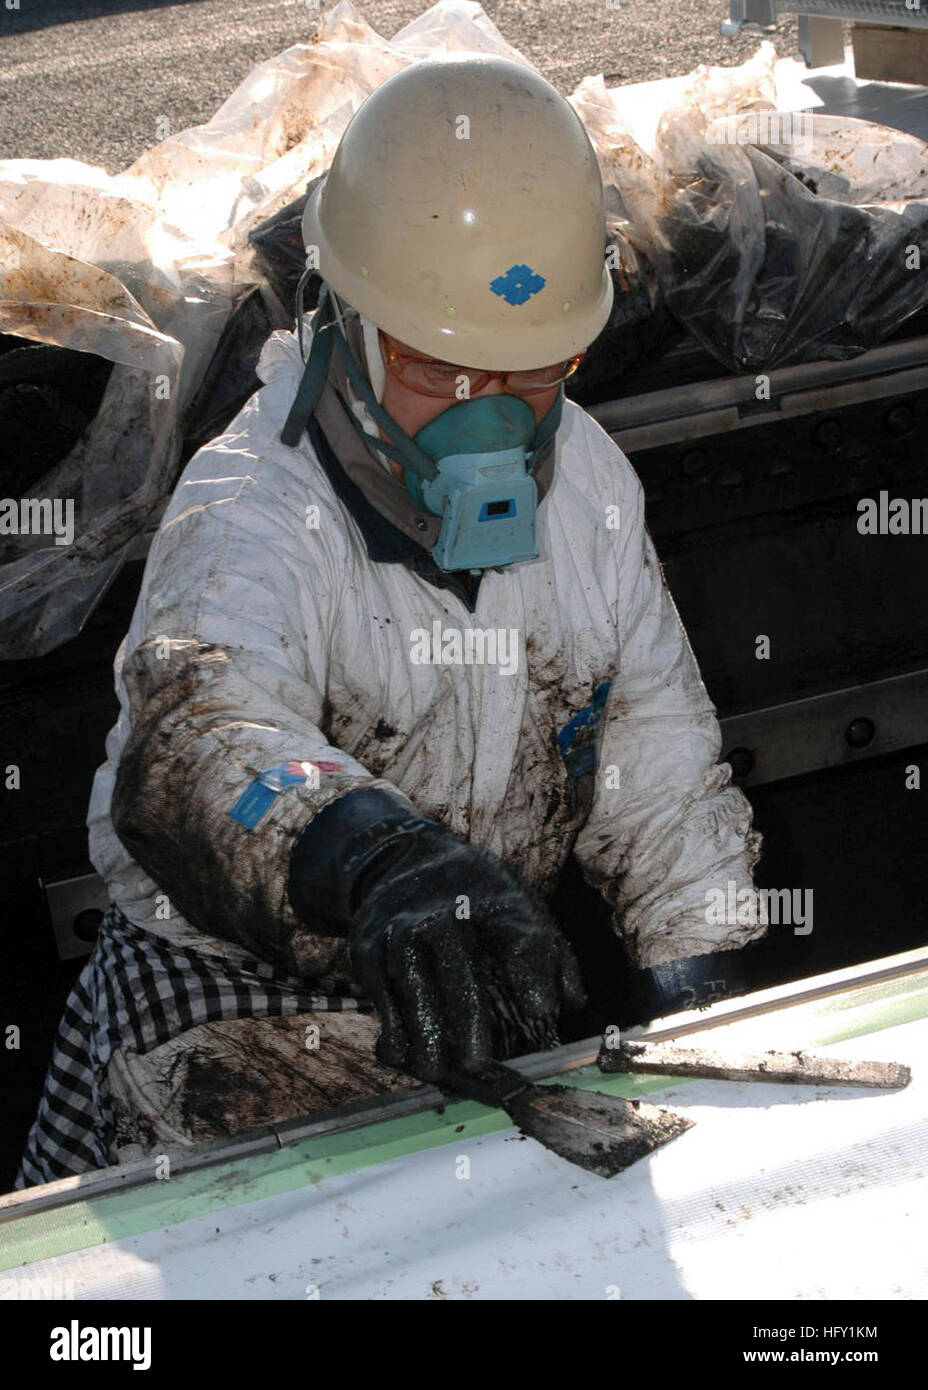 A Japanese shipyard worker performs maintenance on one of USS George Washington's four aircraft catapults. Japanese workers play a critical role in maintaining and upgrading equipment while the Navy's only permanently forward-deployed aircraft carrier is in port. 2010 is the 50th anniversary of the treaty of mutual cooperation and security between Japan and the United States. (Photo by: Petty Officer 2nd Class John J. Mike) USS George Washington DVIDS248282 Stock Photo